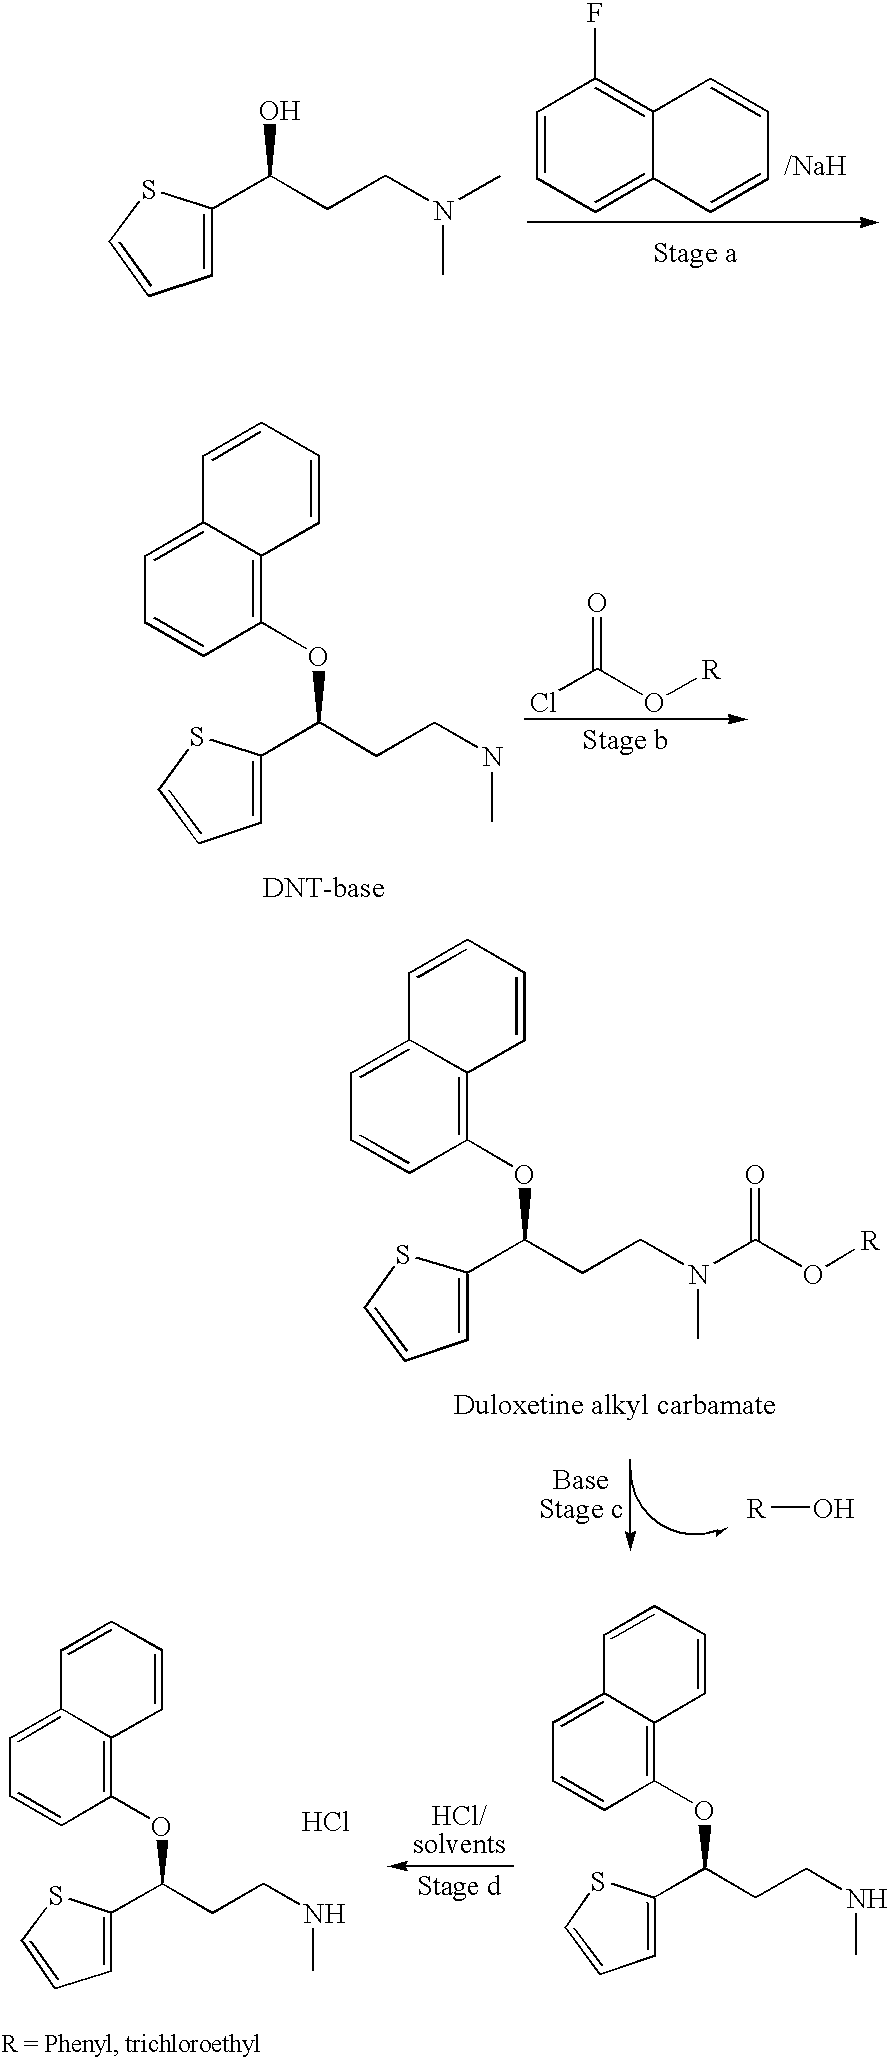 Process for preparing pharmaceutically acceptable salts of duloxetine and intermediates thereof